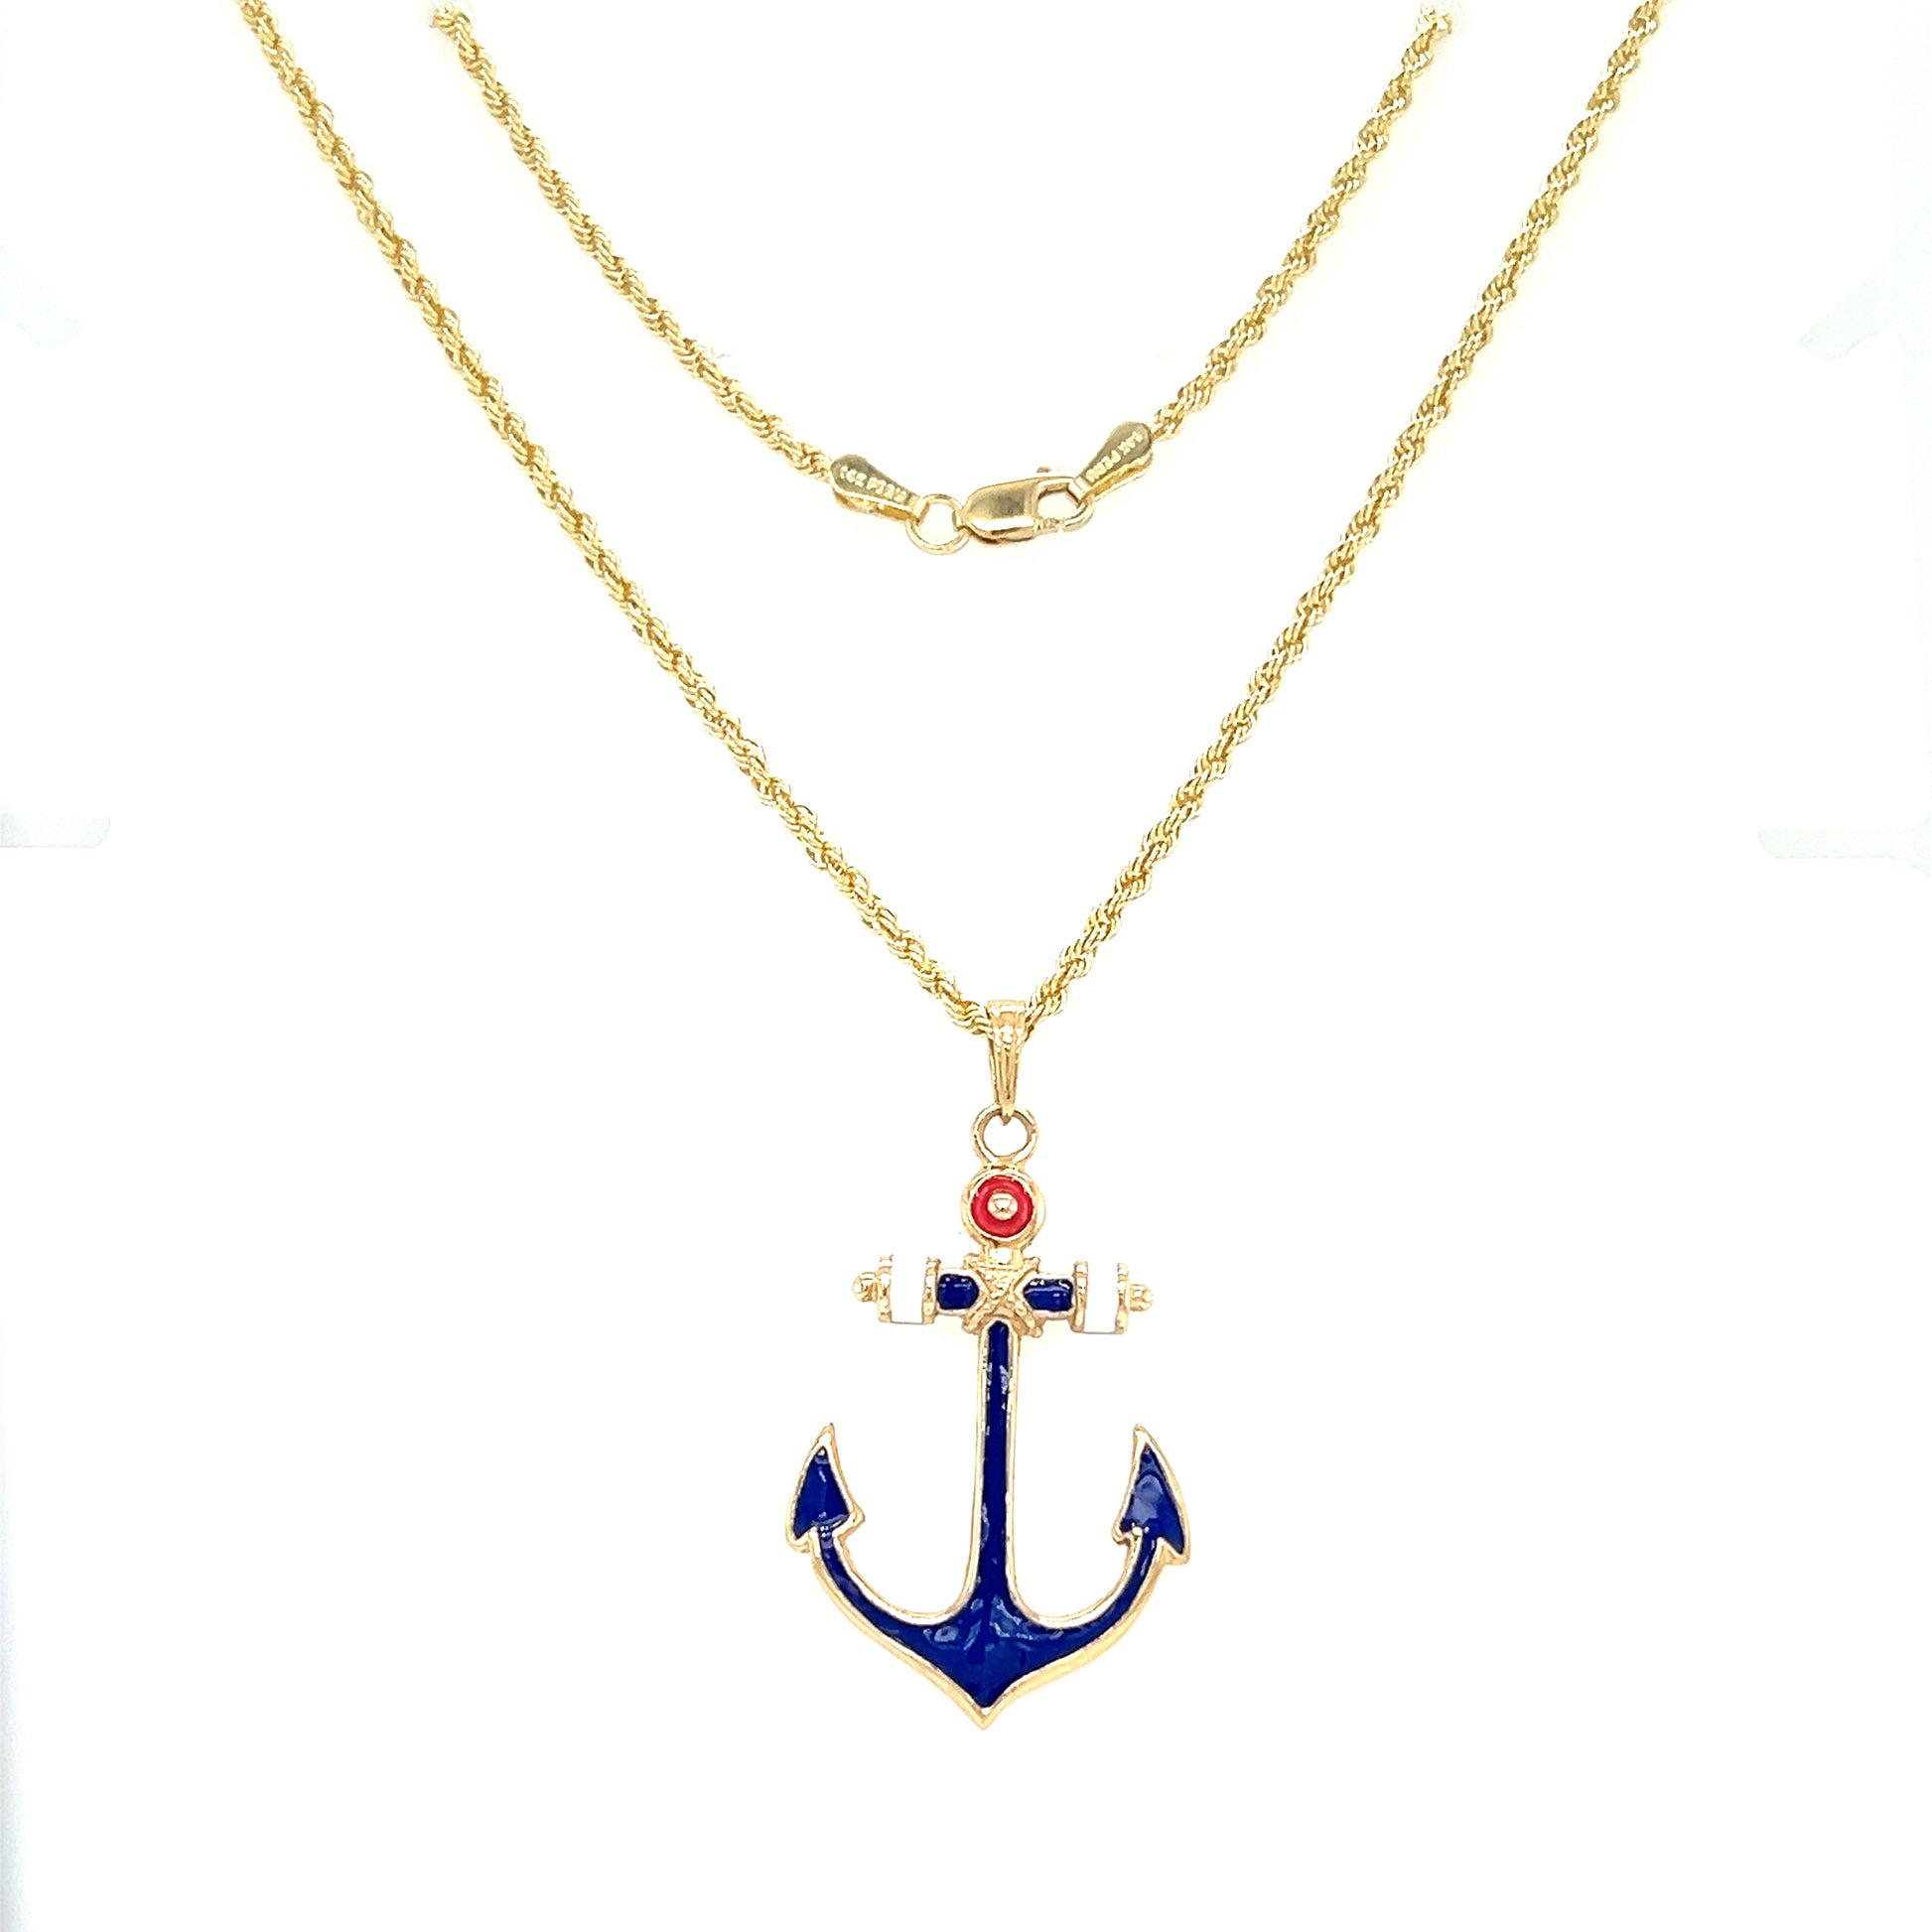 Anchor Pendant with Red White and Blue Enamel in 14K Yellow Gold Full Chain View